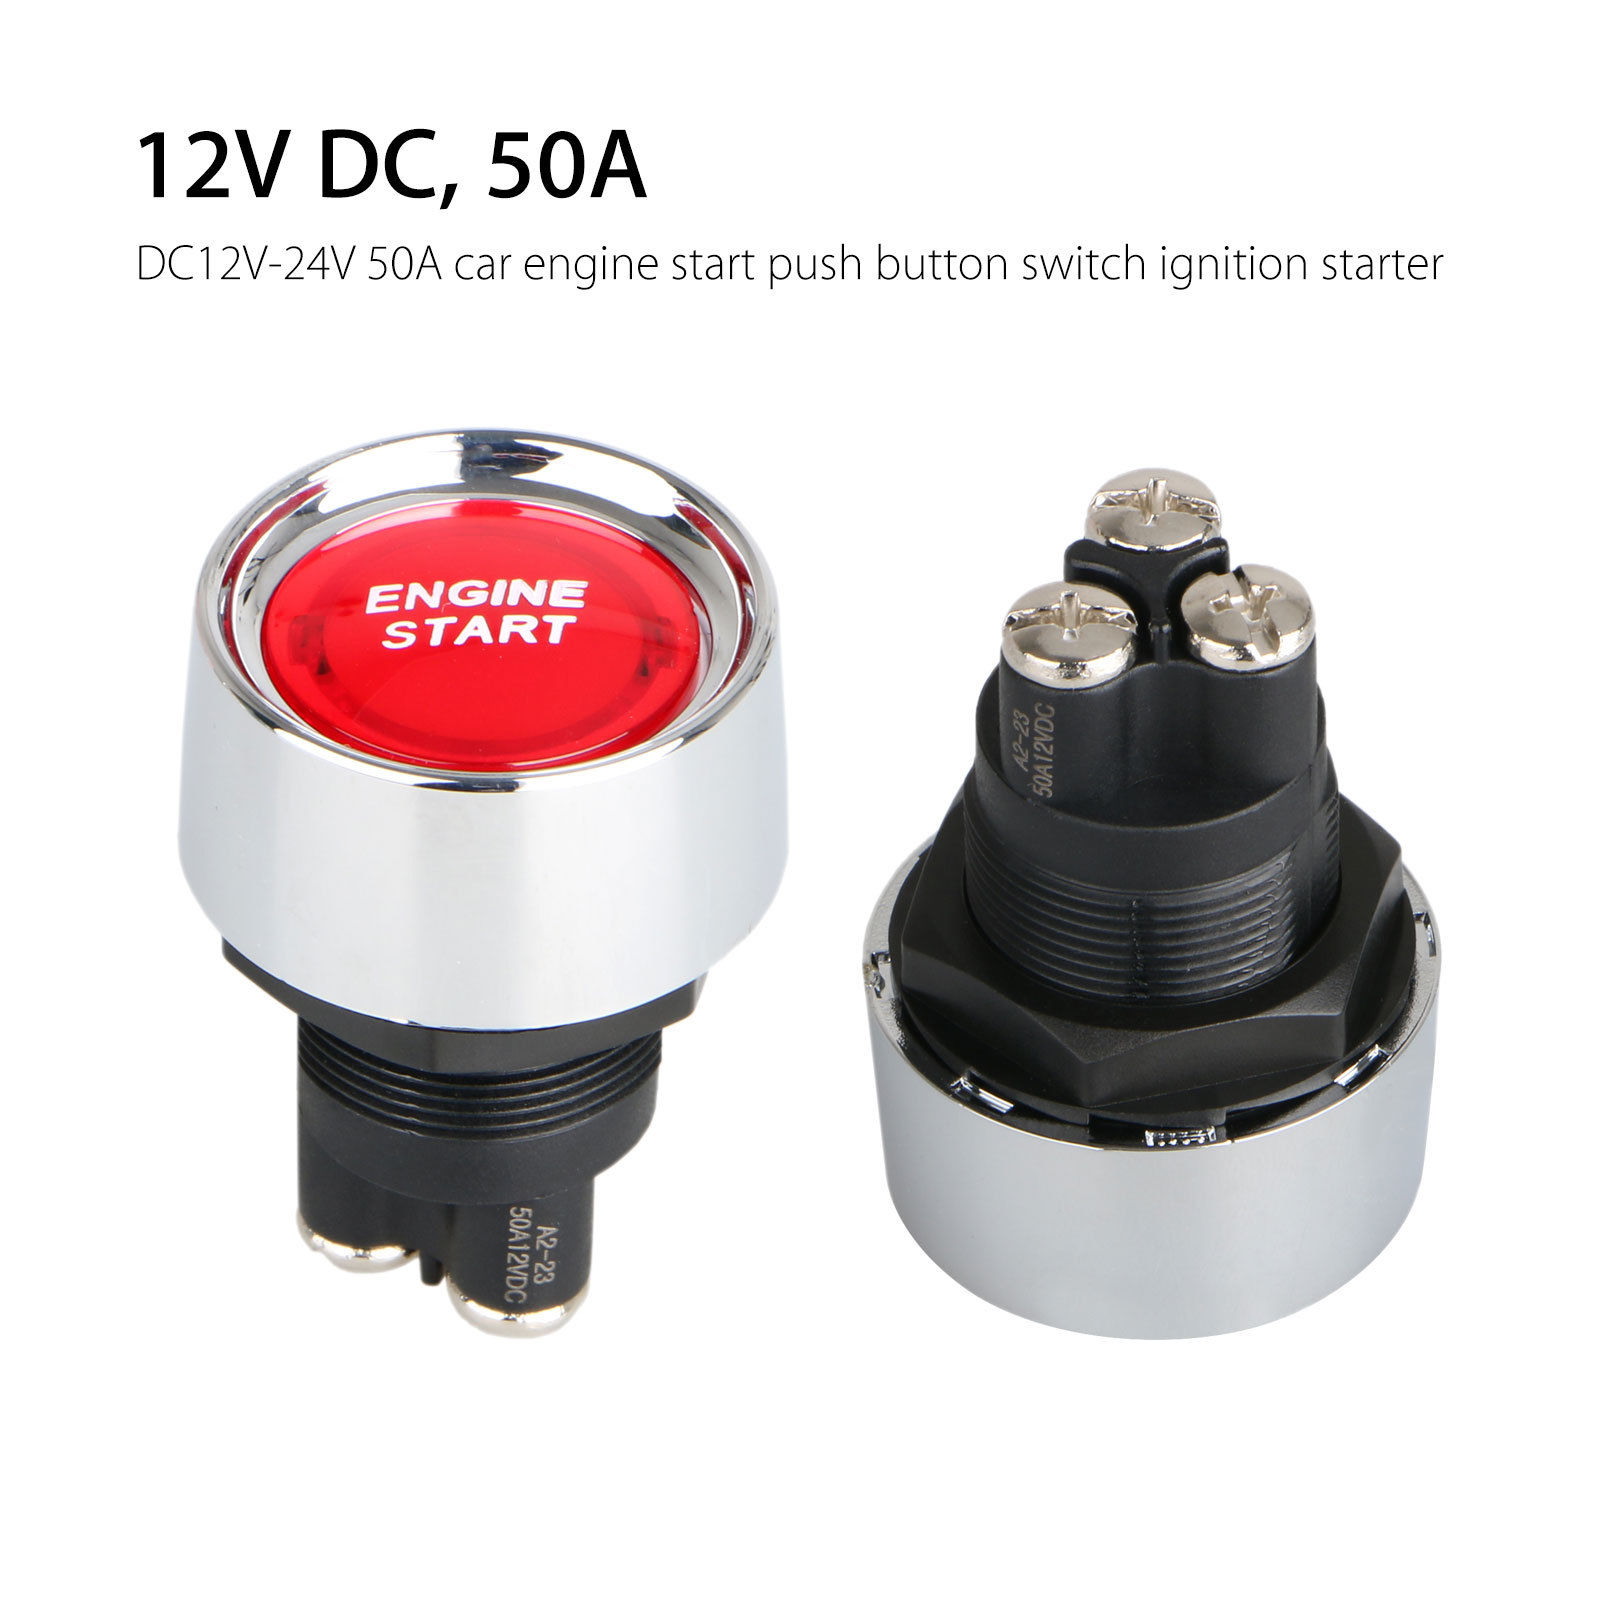 Pack of 3 Push Button Momentary Starter Switch Ampper Heavy Duty Waterproof Ignition Start Switch for 12V Engine Start and Horn 